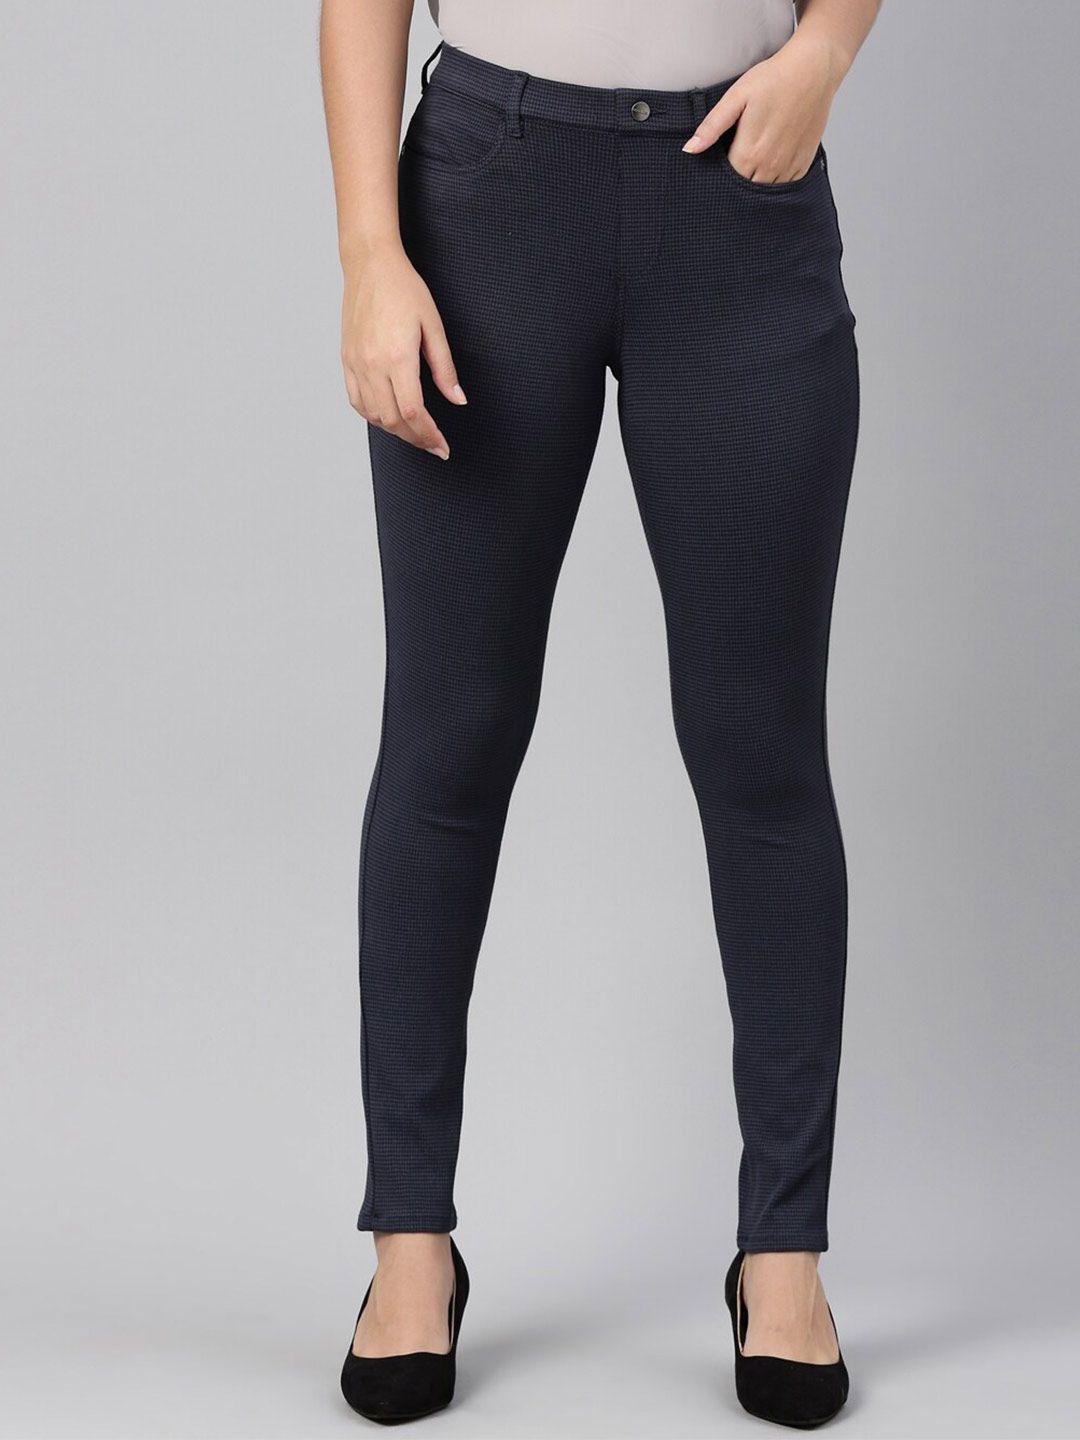 go-colors-women-slim-fit-checked-jeggings